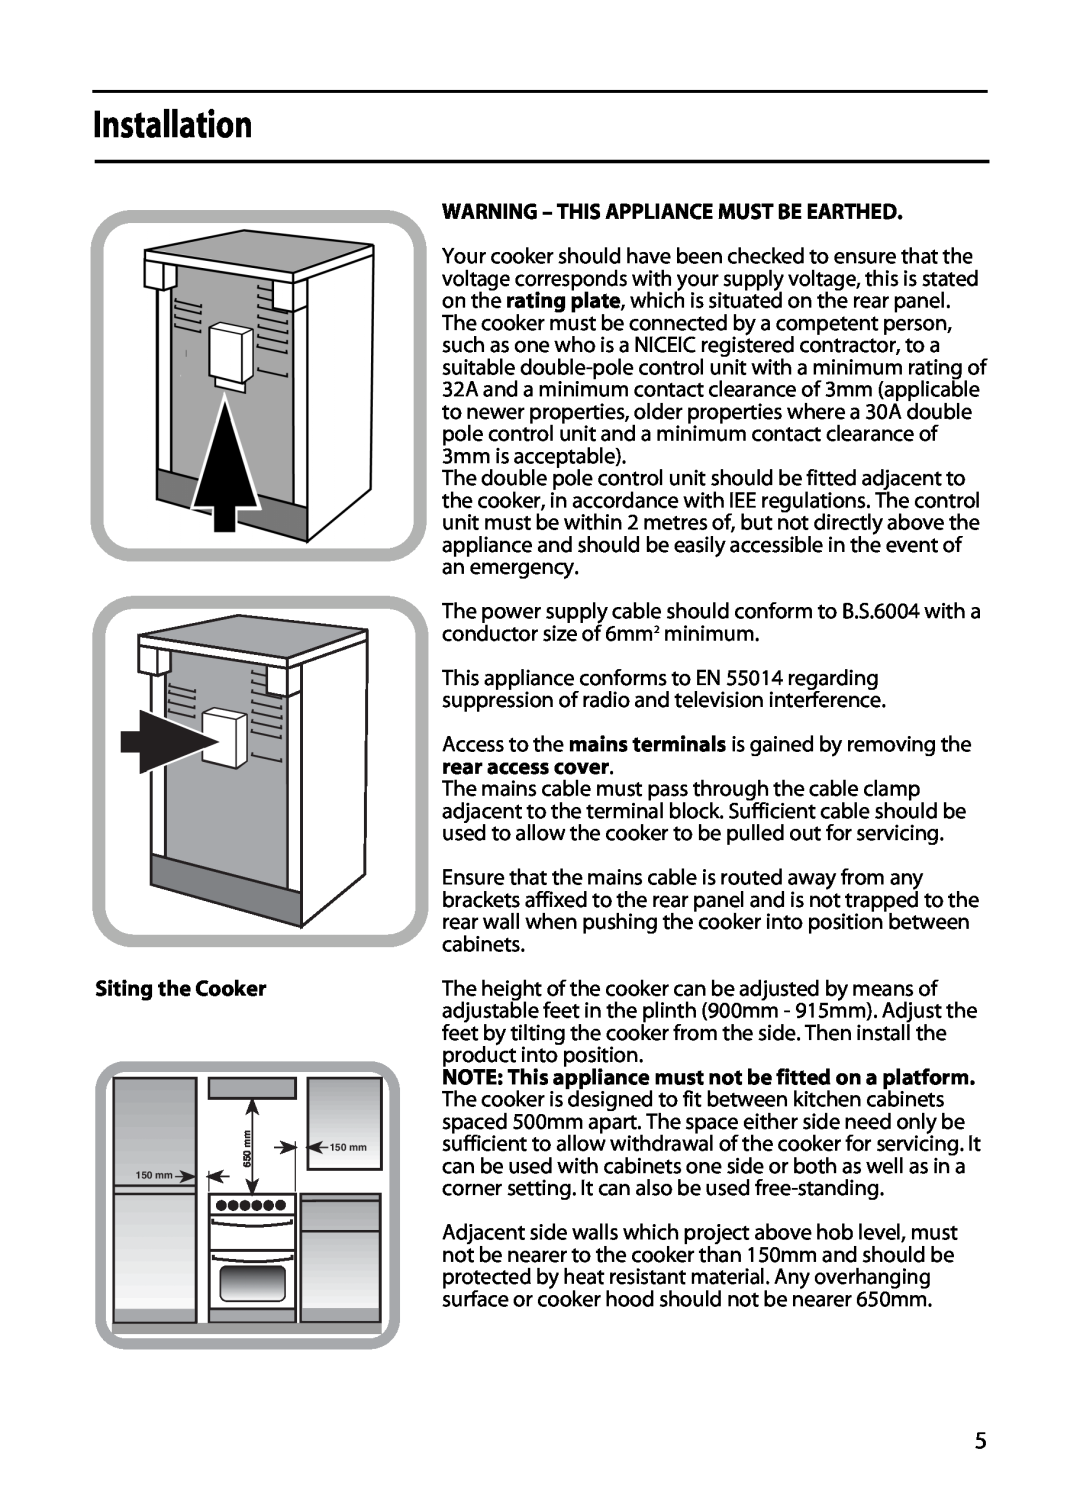 Hotpoint 50cm manual Installation, Siting the Cooker, Warning - This Appliance Must Be Earthed 